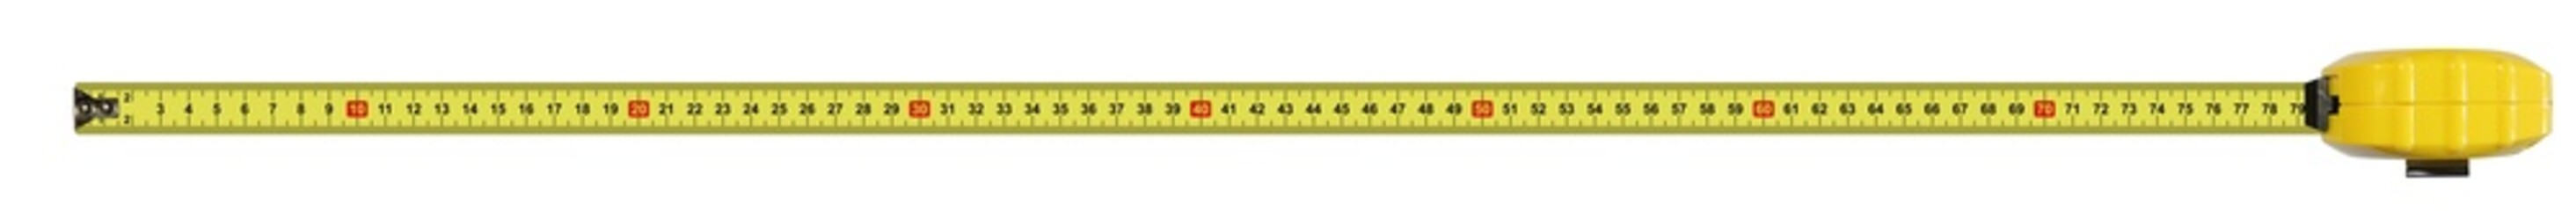 Tape measure - Super high resolution. Perfect focus 68 Mpx - 30611132